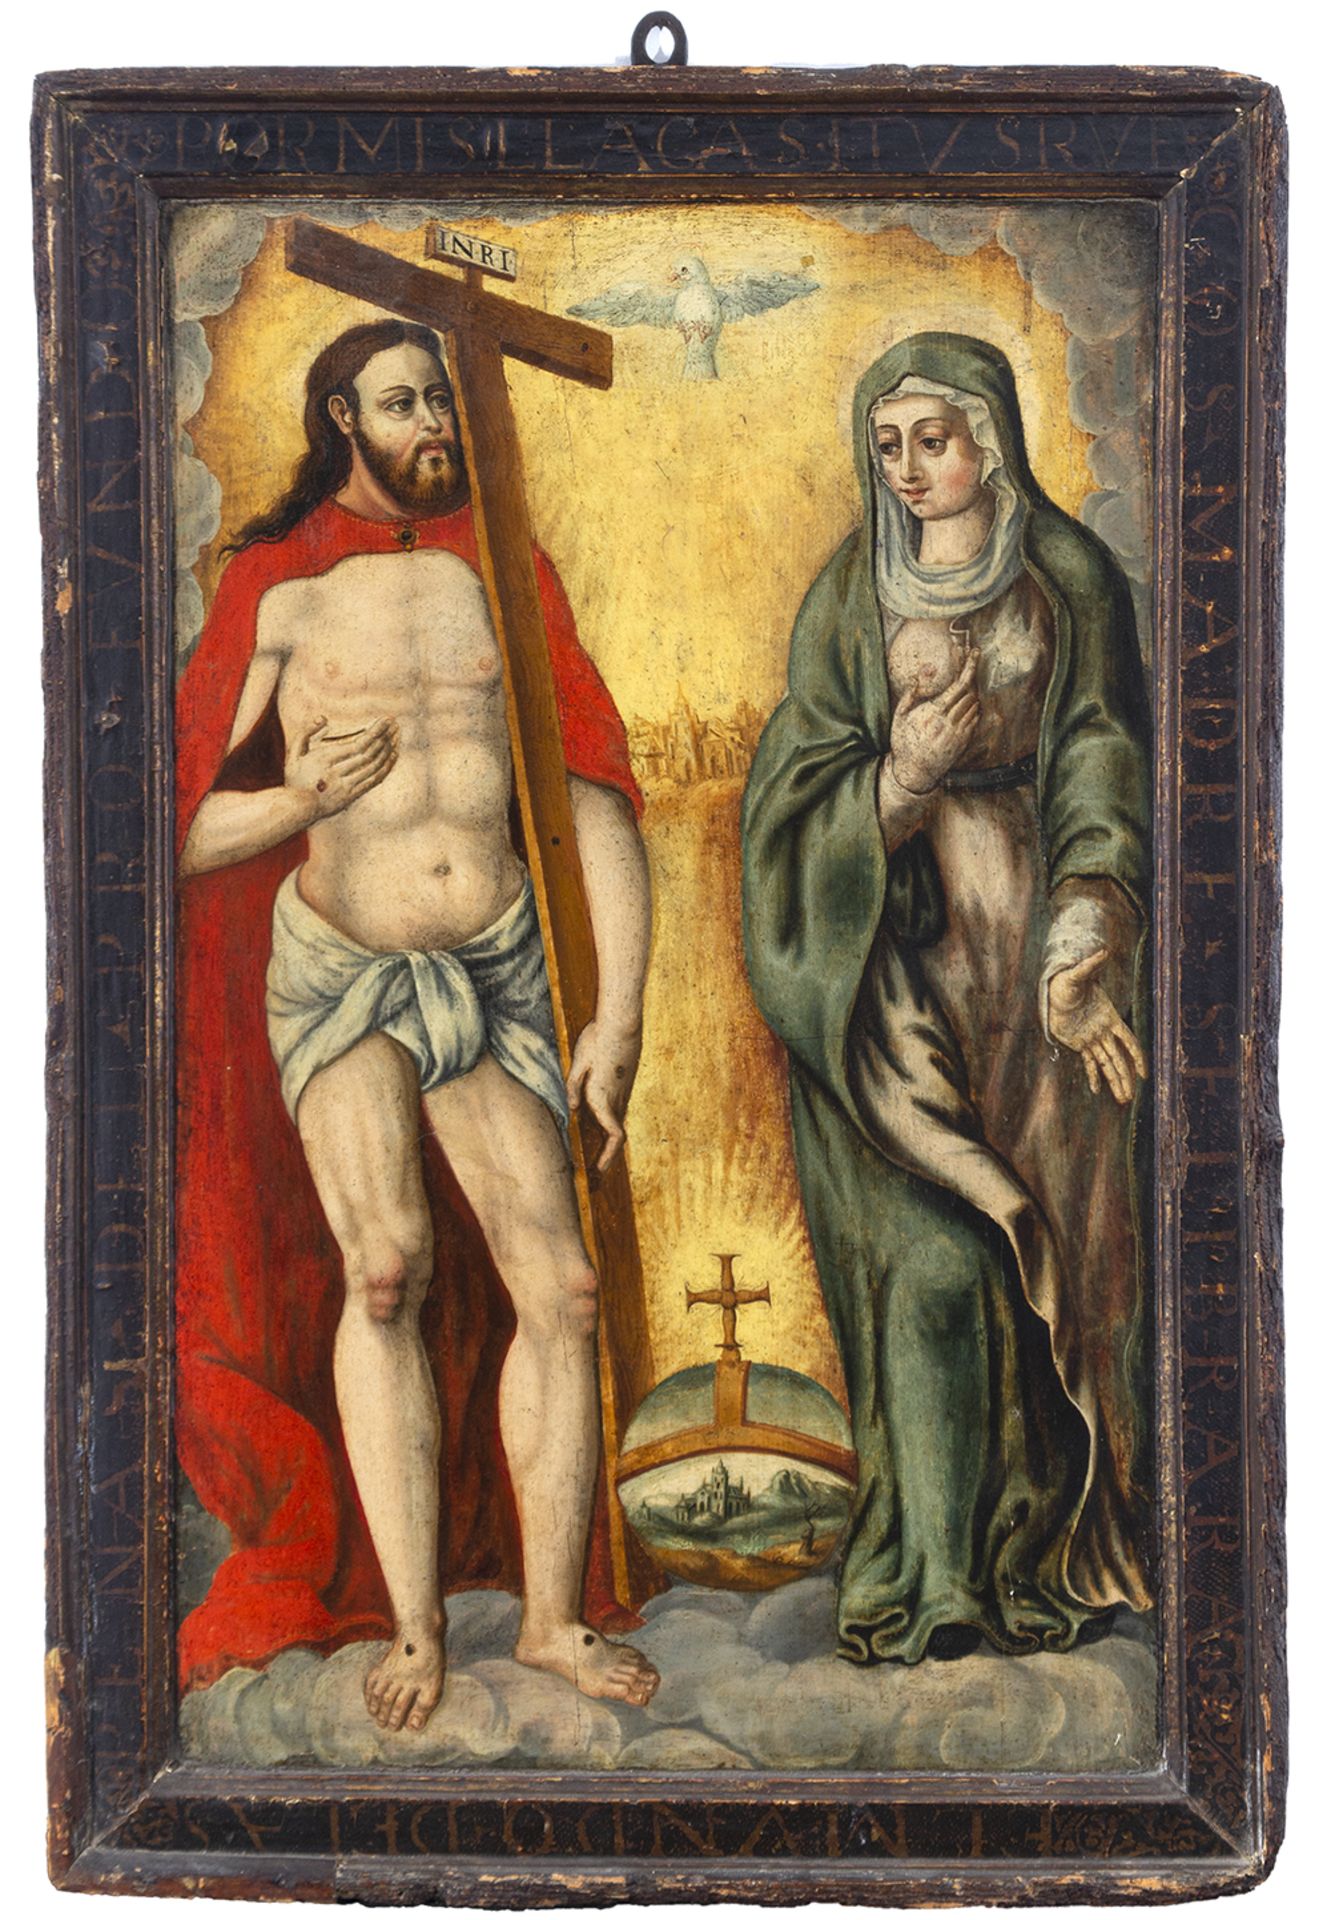 Spanish school of the 16th century. Jesus and the Virgin with the Holy Spirit.